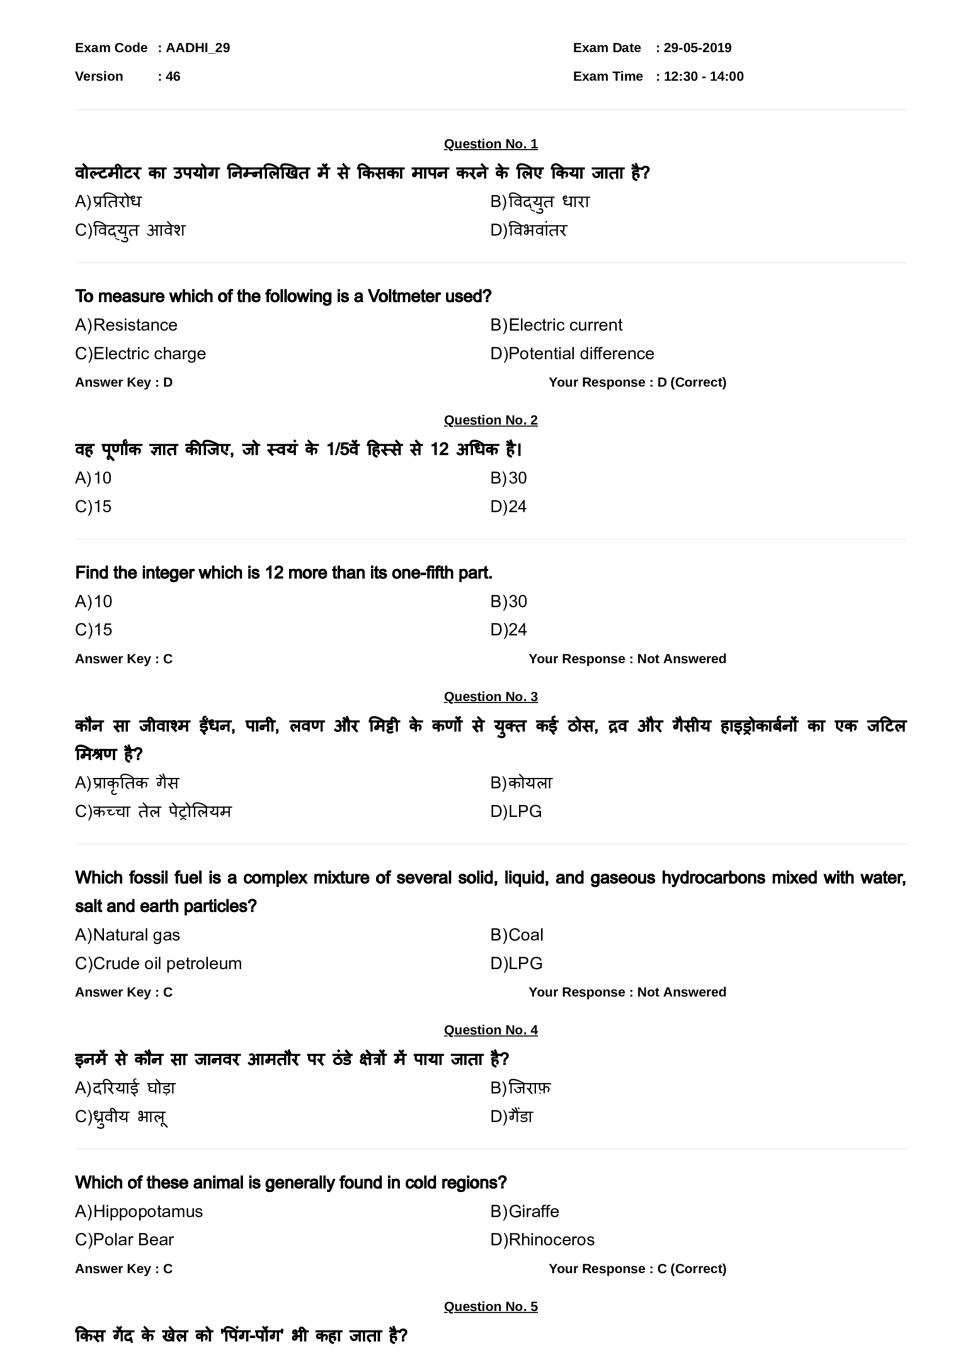 RRB JE Question Paper with Answers for 29 May 2019 Exam Shift 2 - Page 1